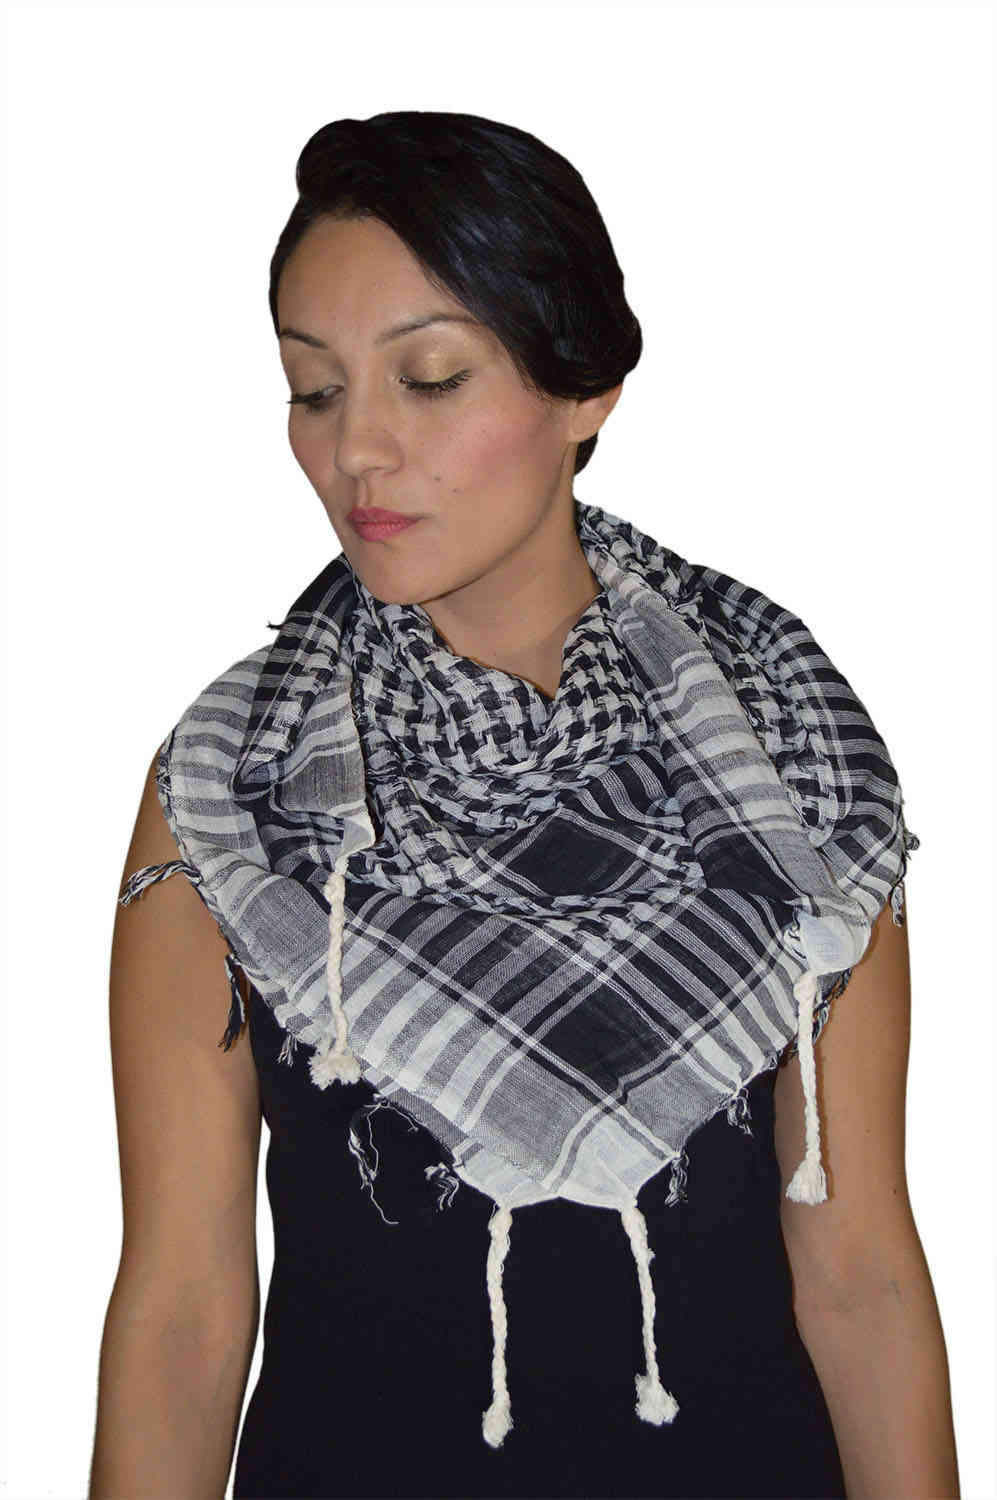 Silk Square Scarf Inspired by Moroccan Mosaic Tiles From the 